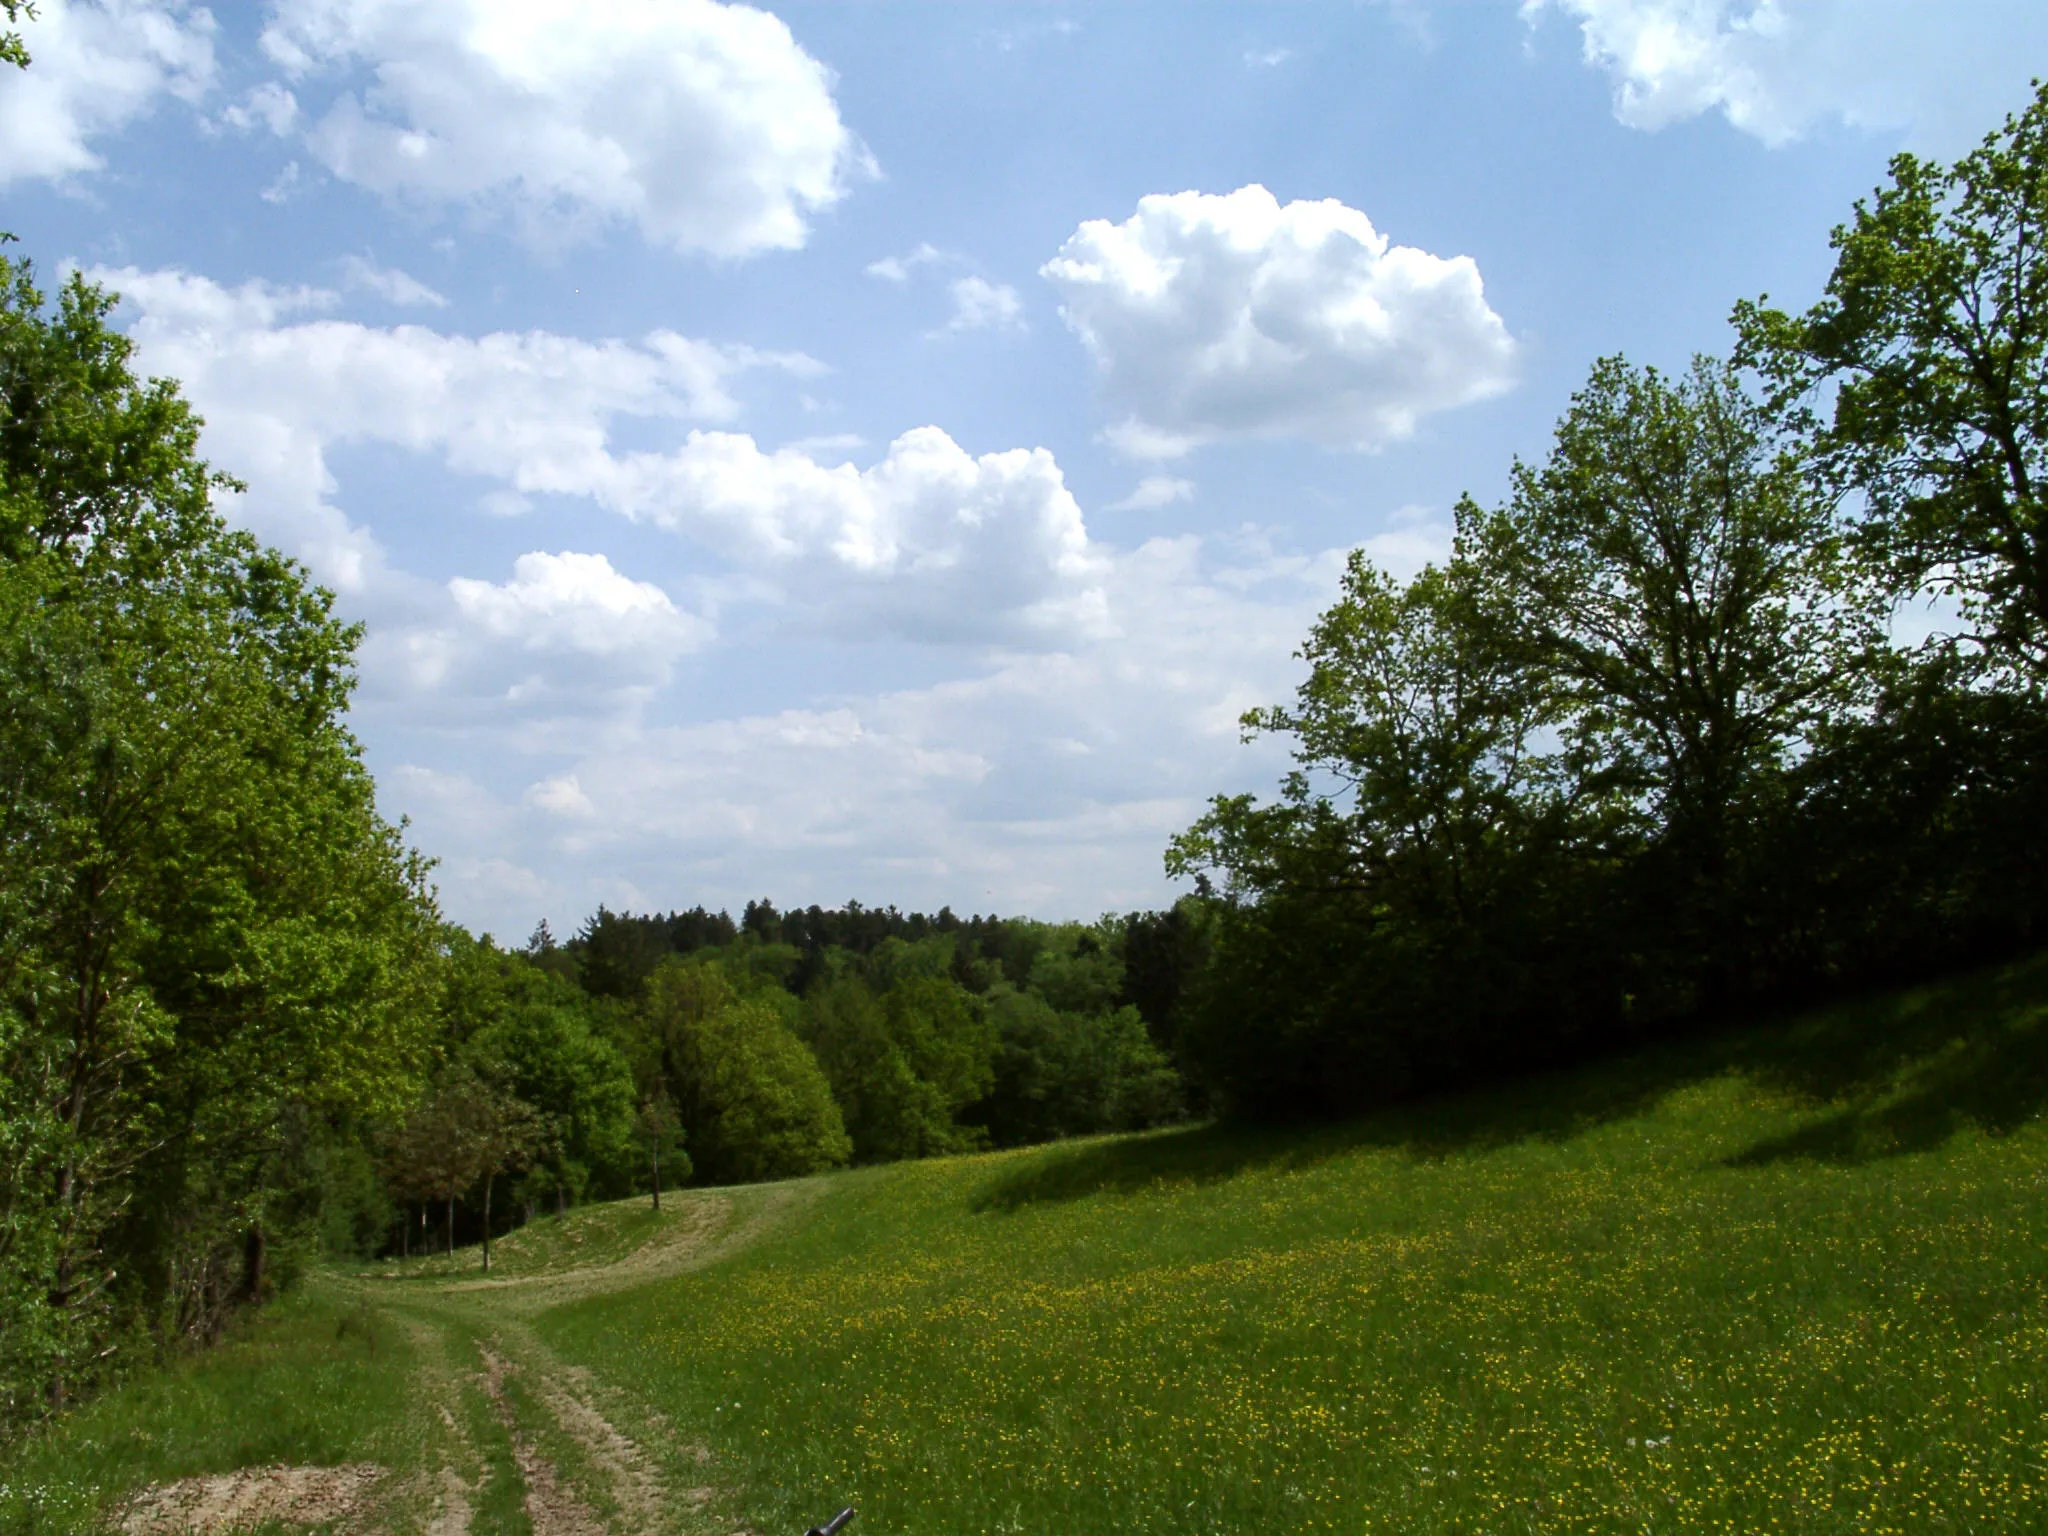 Photo showing: Landscape of Schwalldorf a suburb of Rottenburg am Neckar in the German state of Baden-Württemberg. The photo was taken in the Haesele a parcel of land on the territory of Schwalldorf.